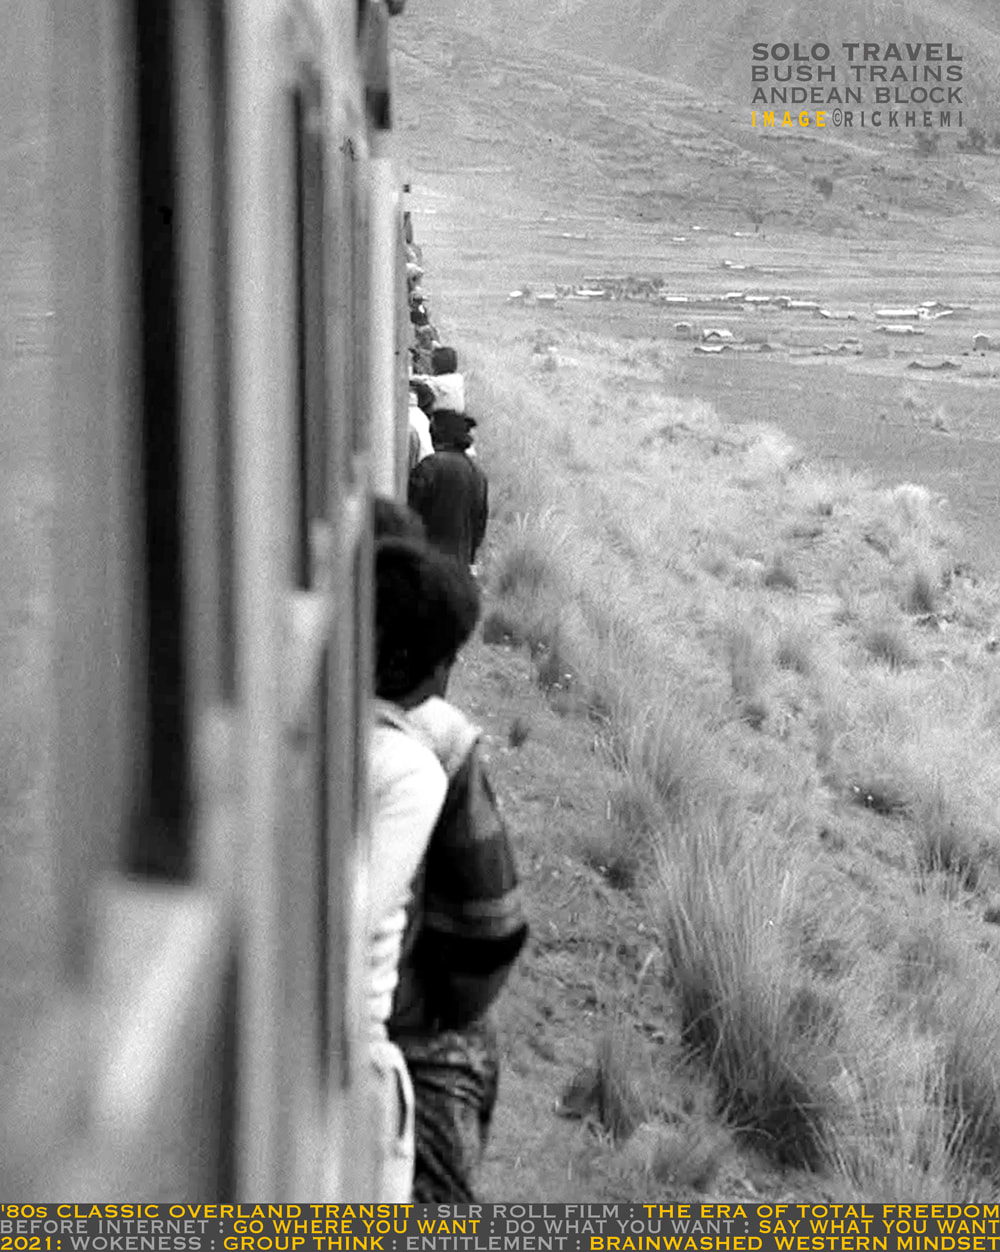 solo overland travel and transit South America, 1980s bush train travel, image by Rick Hemi